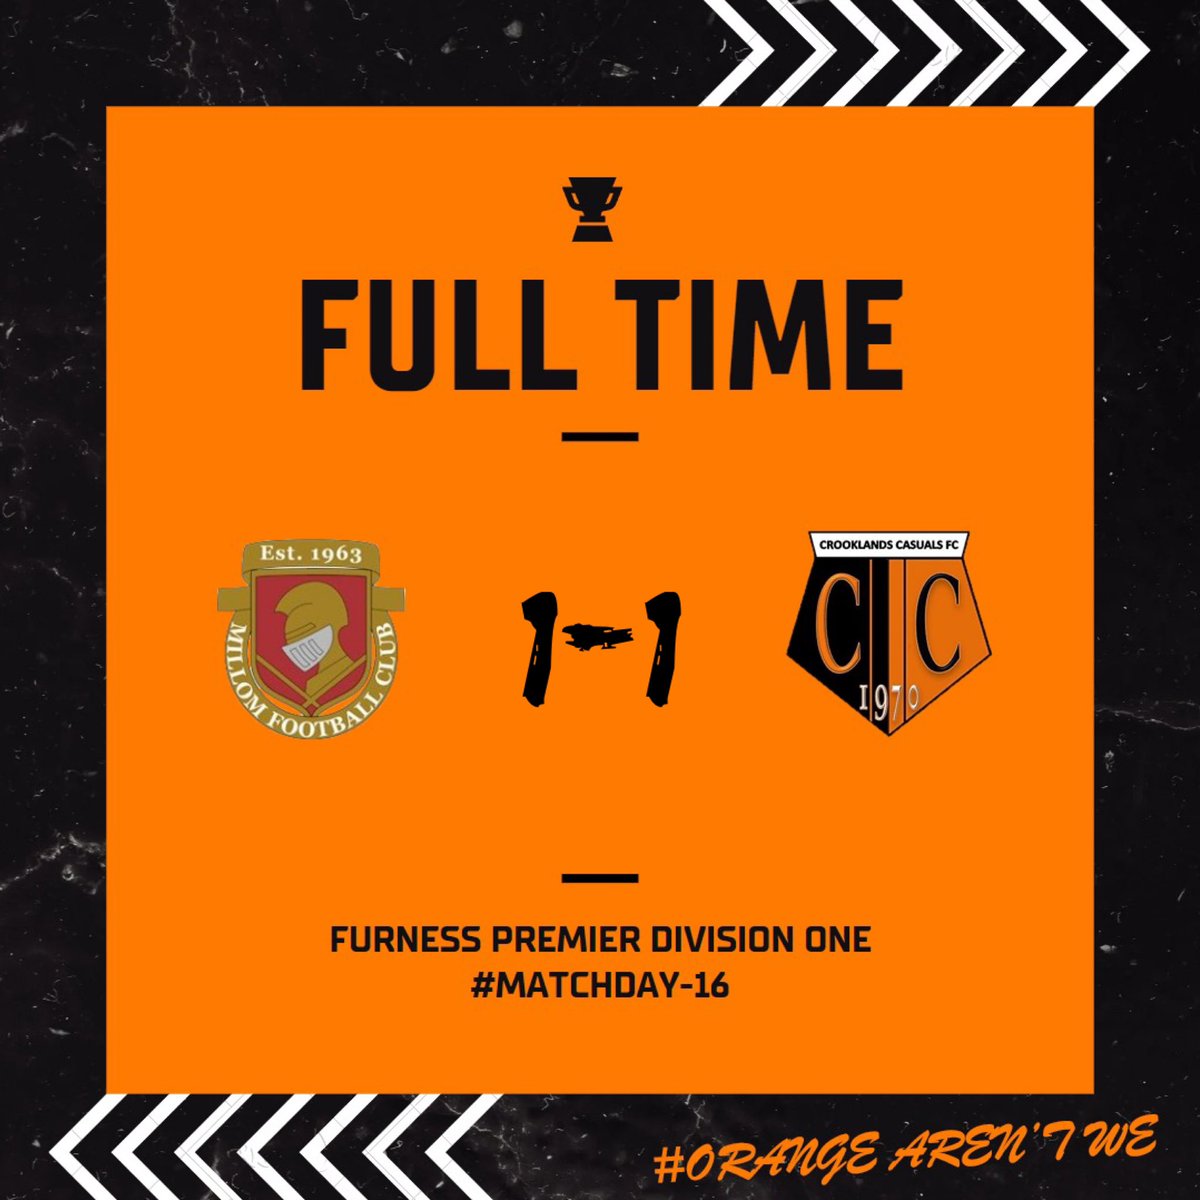 𝐅𝐮𝐥𝐥-𝐓𝐢𝐦𝐞. Millom AFC ‘A’ 1-1 Crooklands Casuals FC 𝐆𝐨𝐚𝐥𝐬𝐜𝐨𝐫𝐞𝐫𝐬: Jake Marston 🟠⚫️